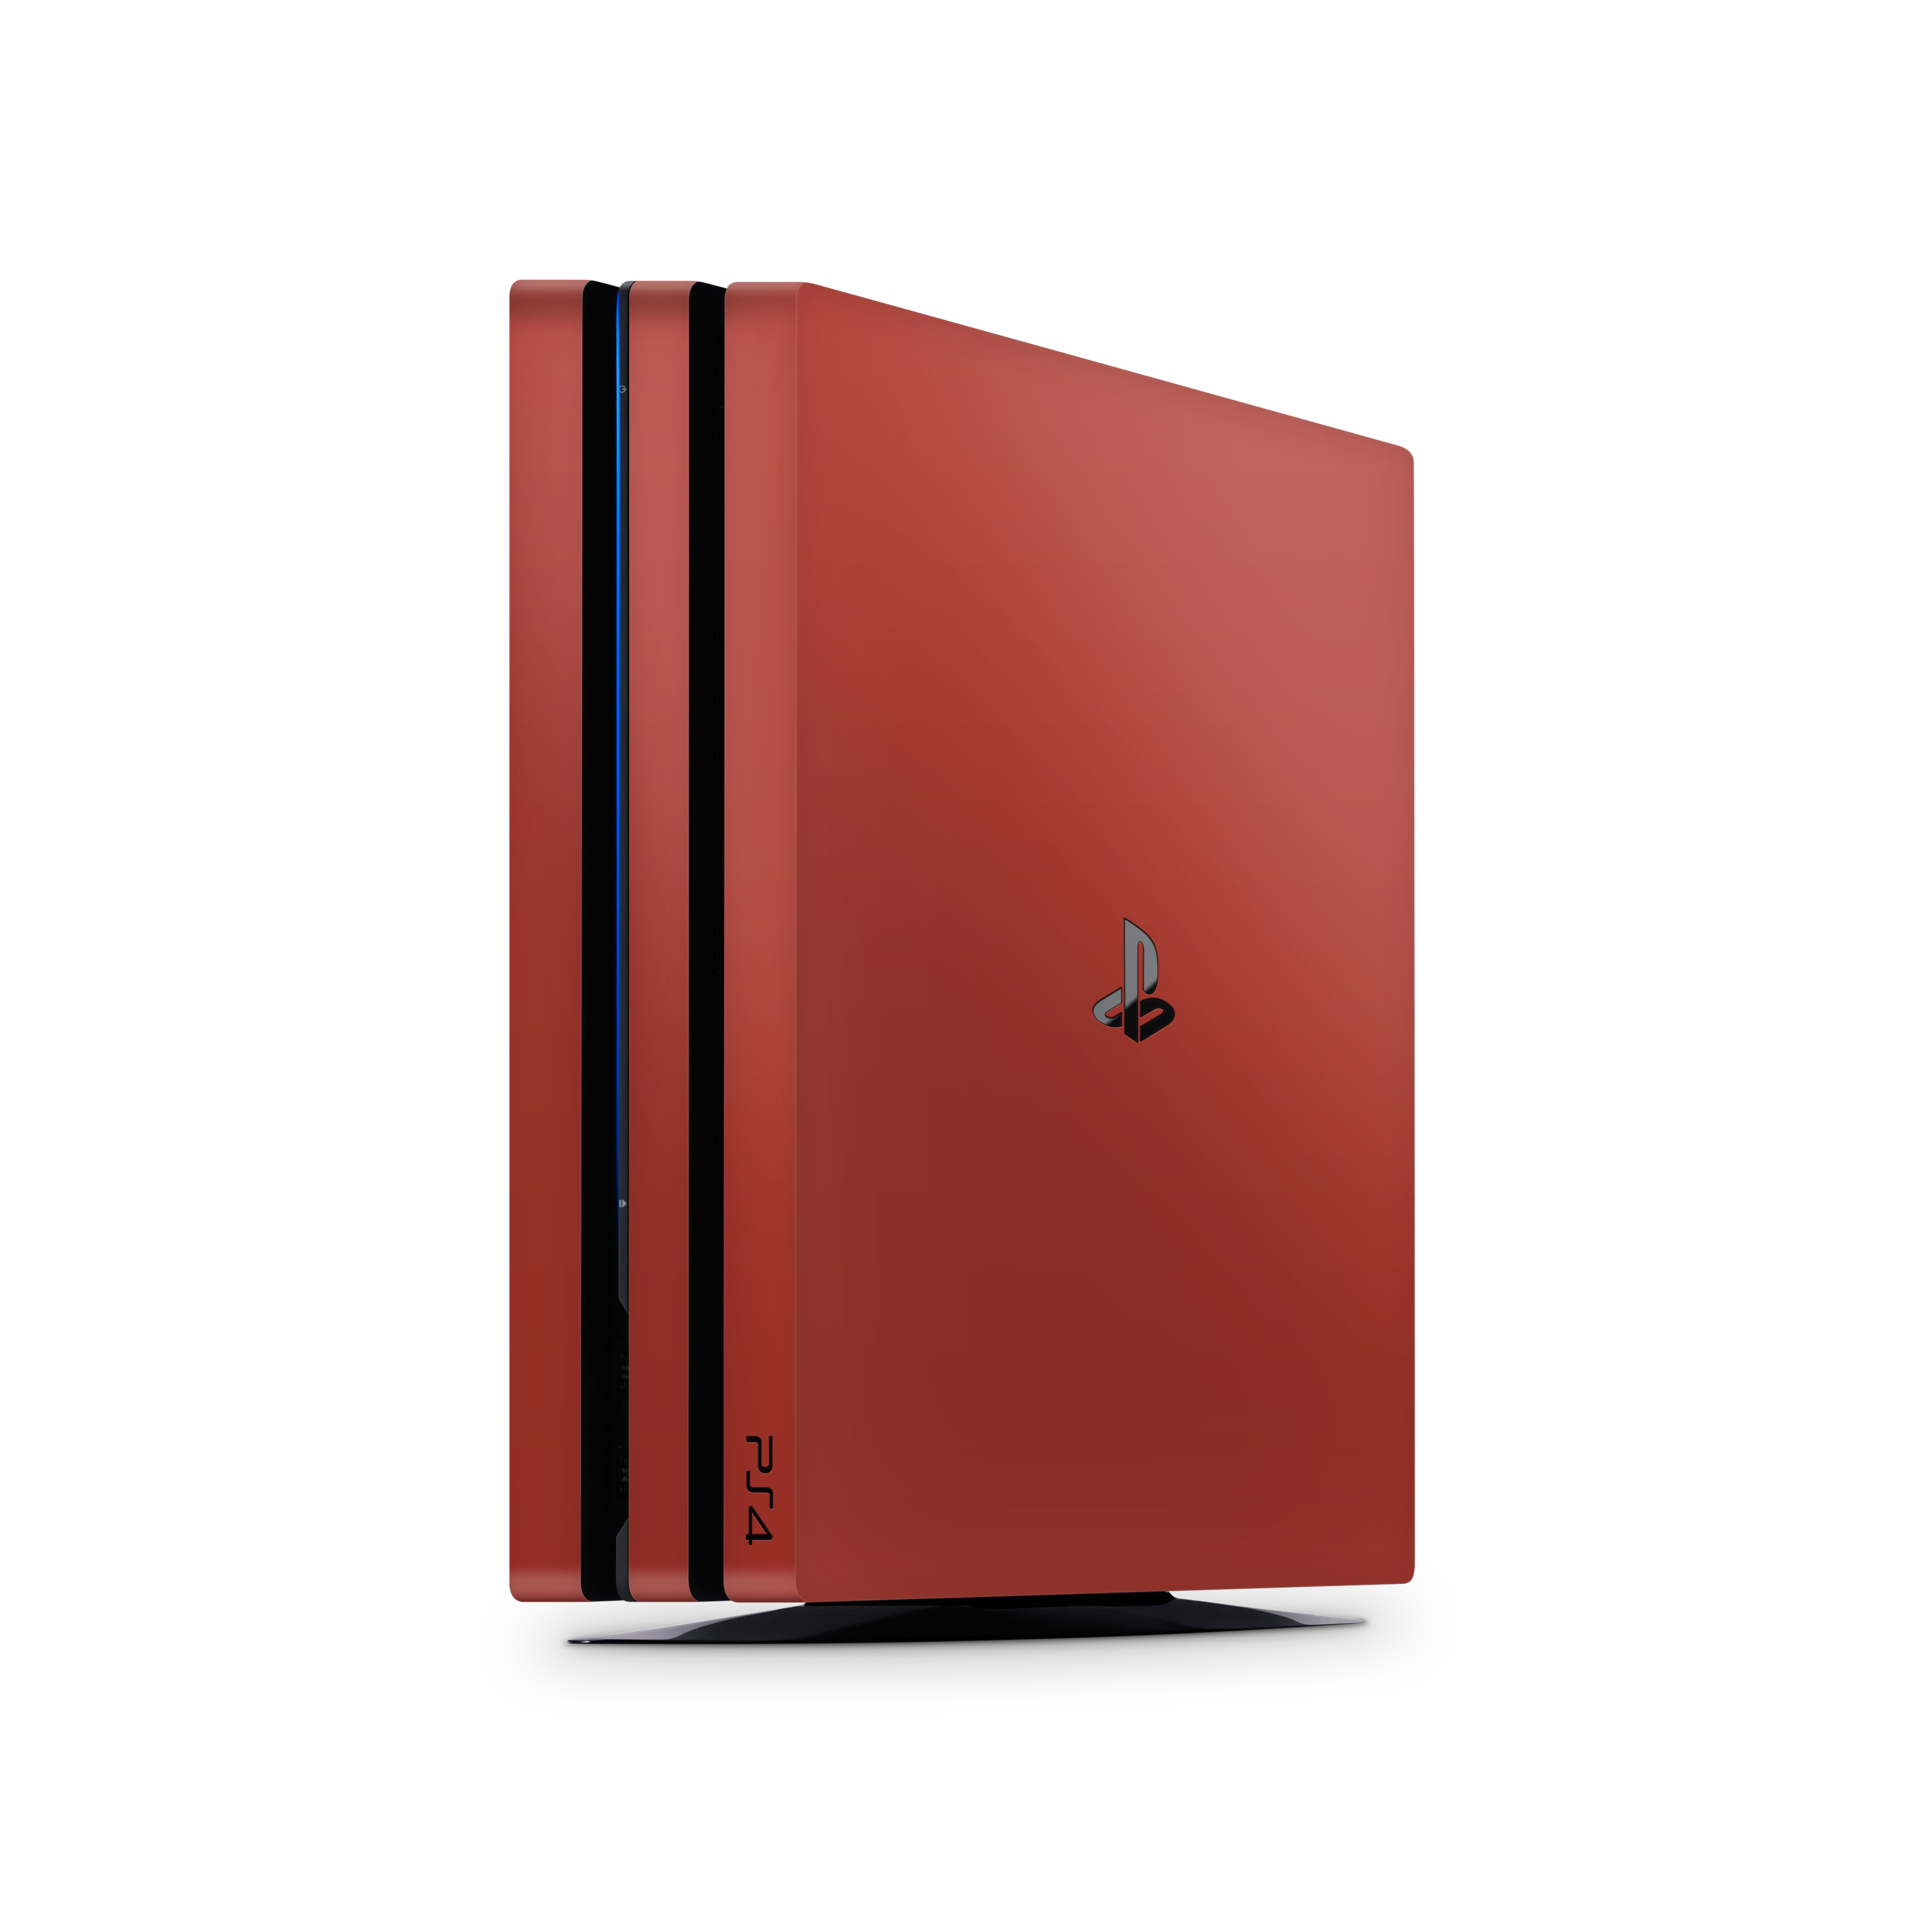 Cherry Red PS4 | PS4 Pro | PS4 Slim Skins